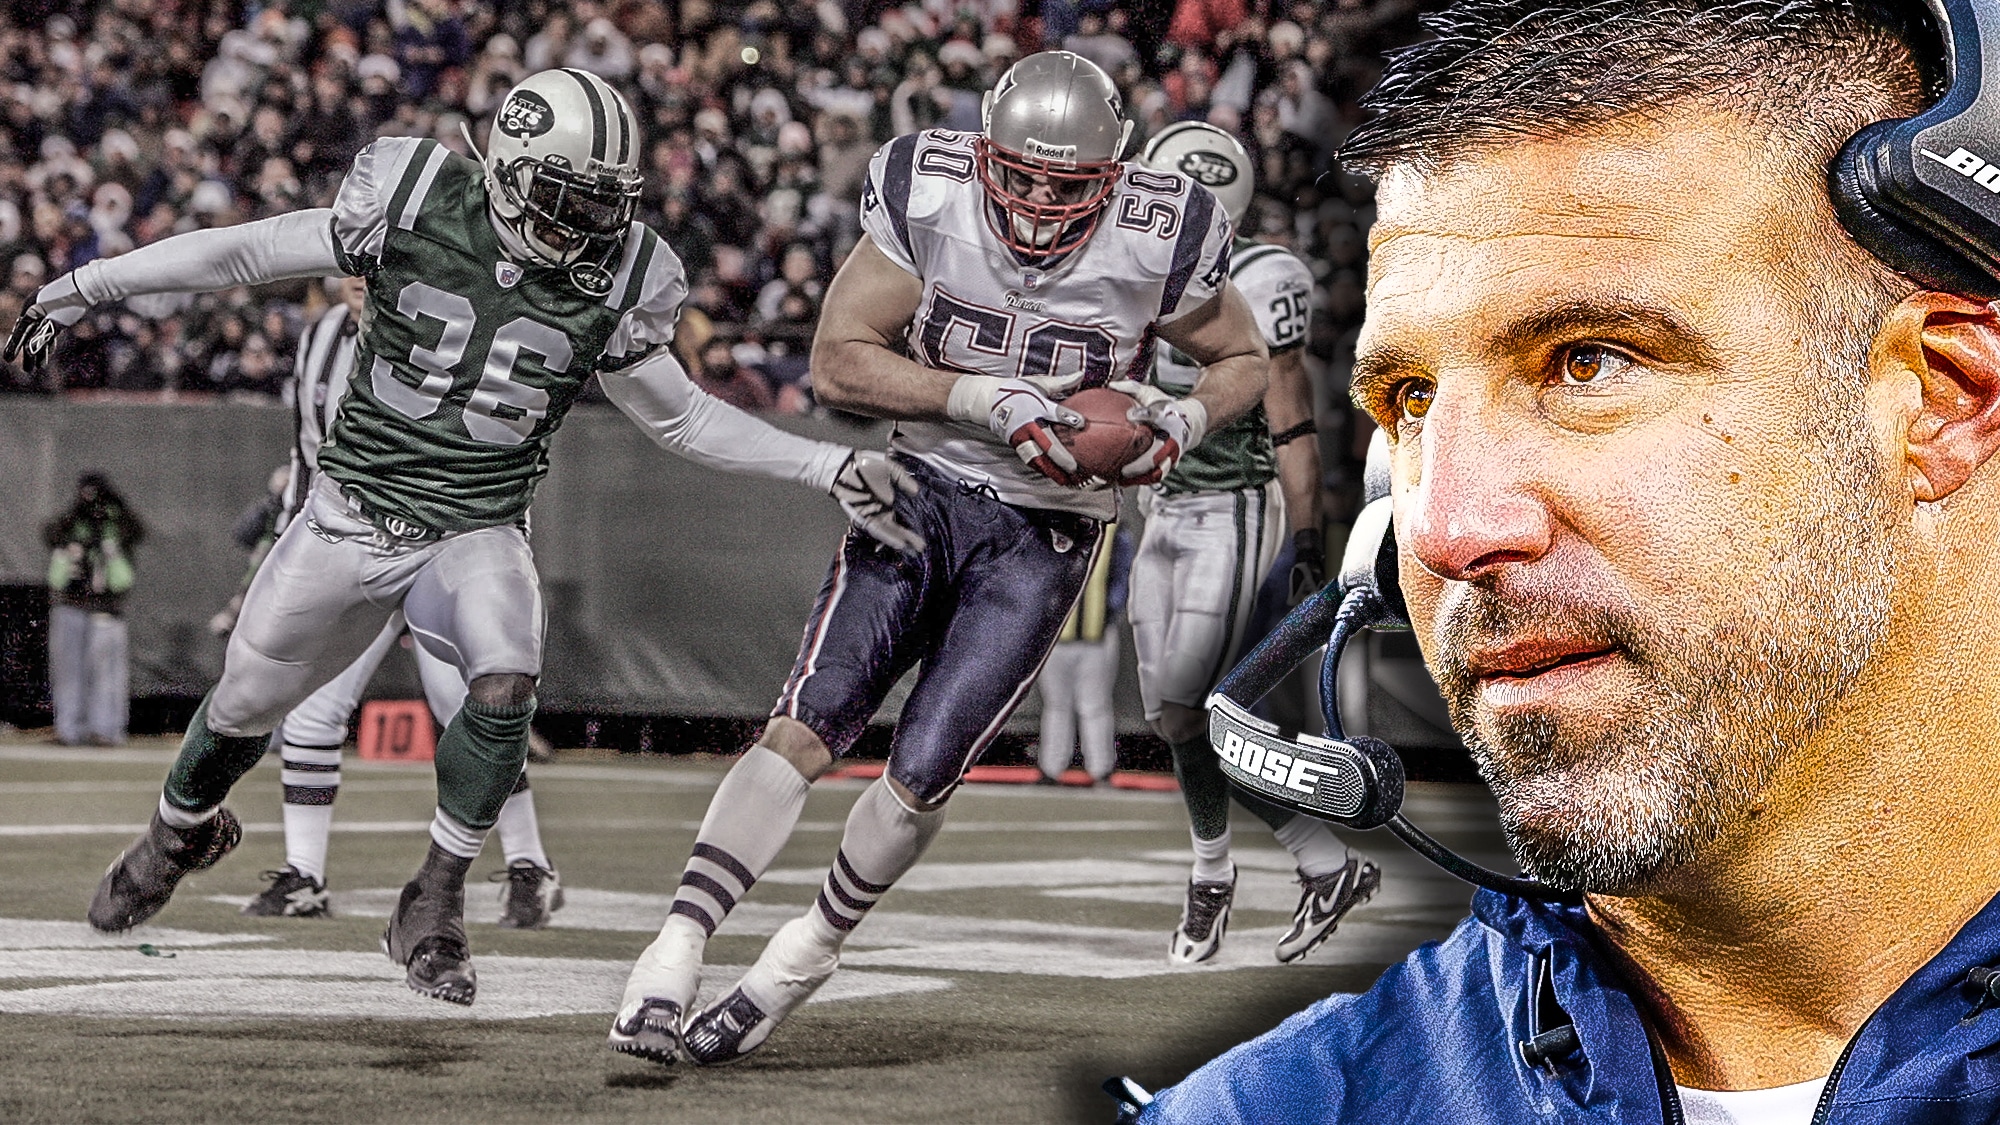 New York Jets provide fond memories, connections for Mike Vrabel